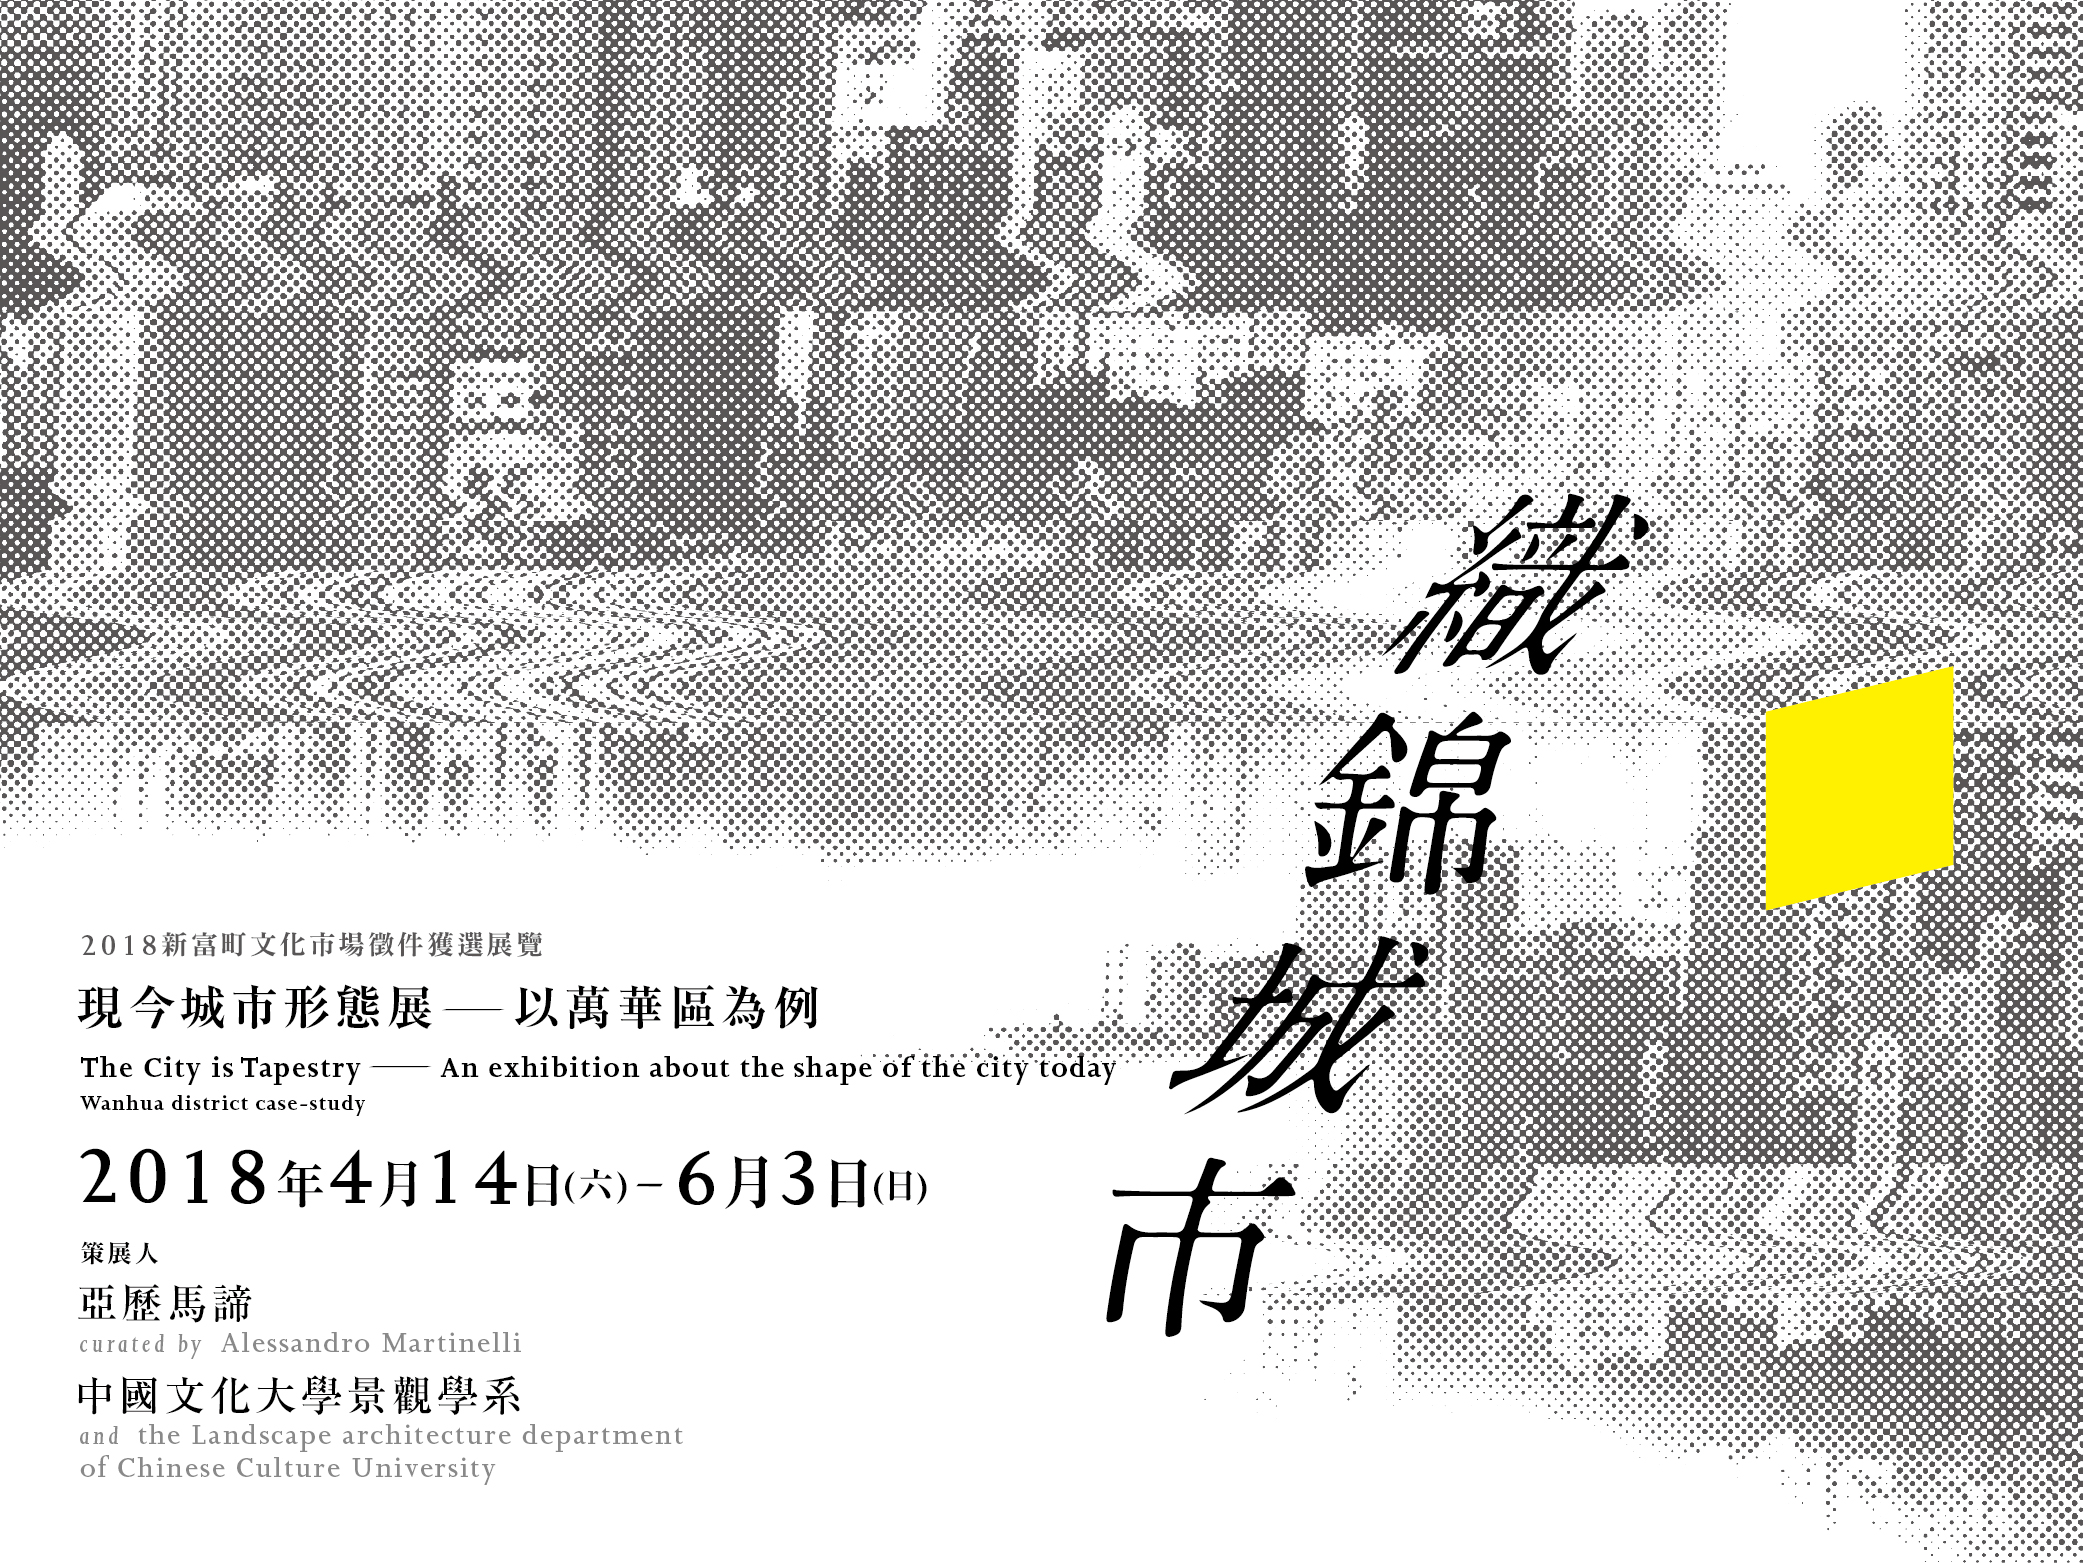 [The Selected Exhibition of U-mkt Open Call 2018] The City is Tapestry